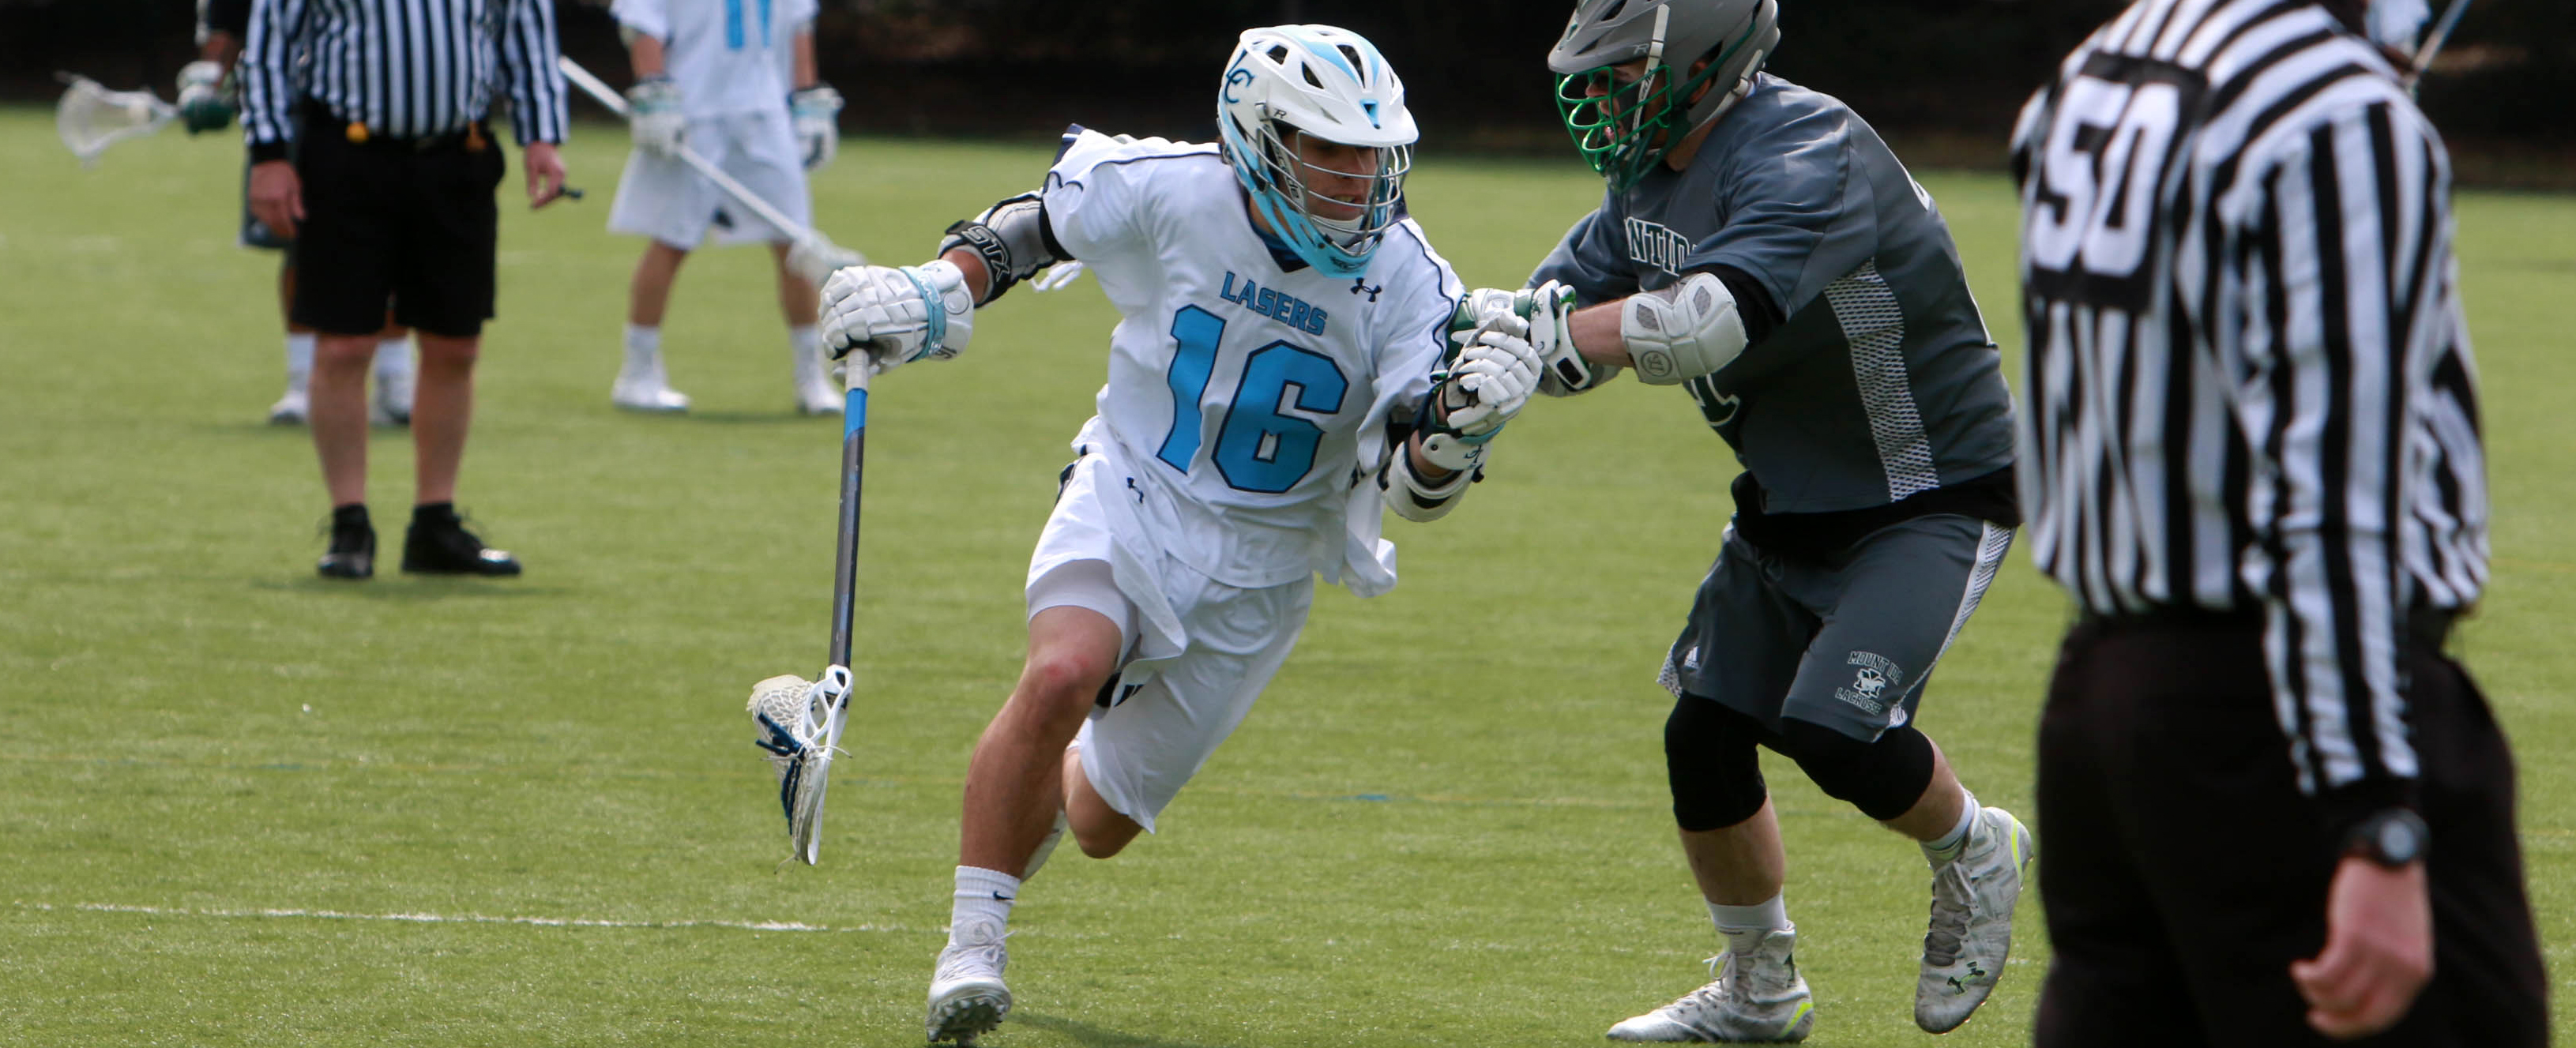 Wildcats Come Back to Down Men's Lacrosse 11-8